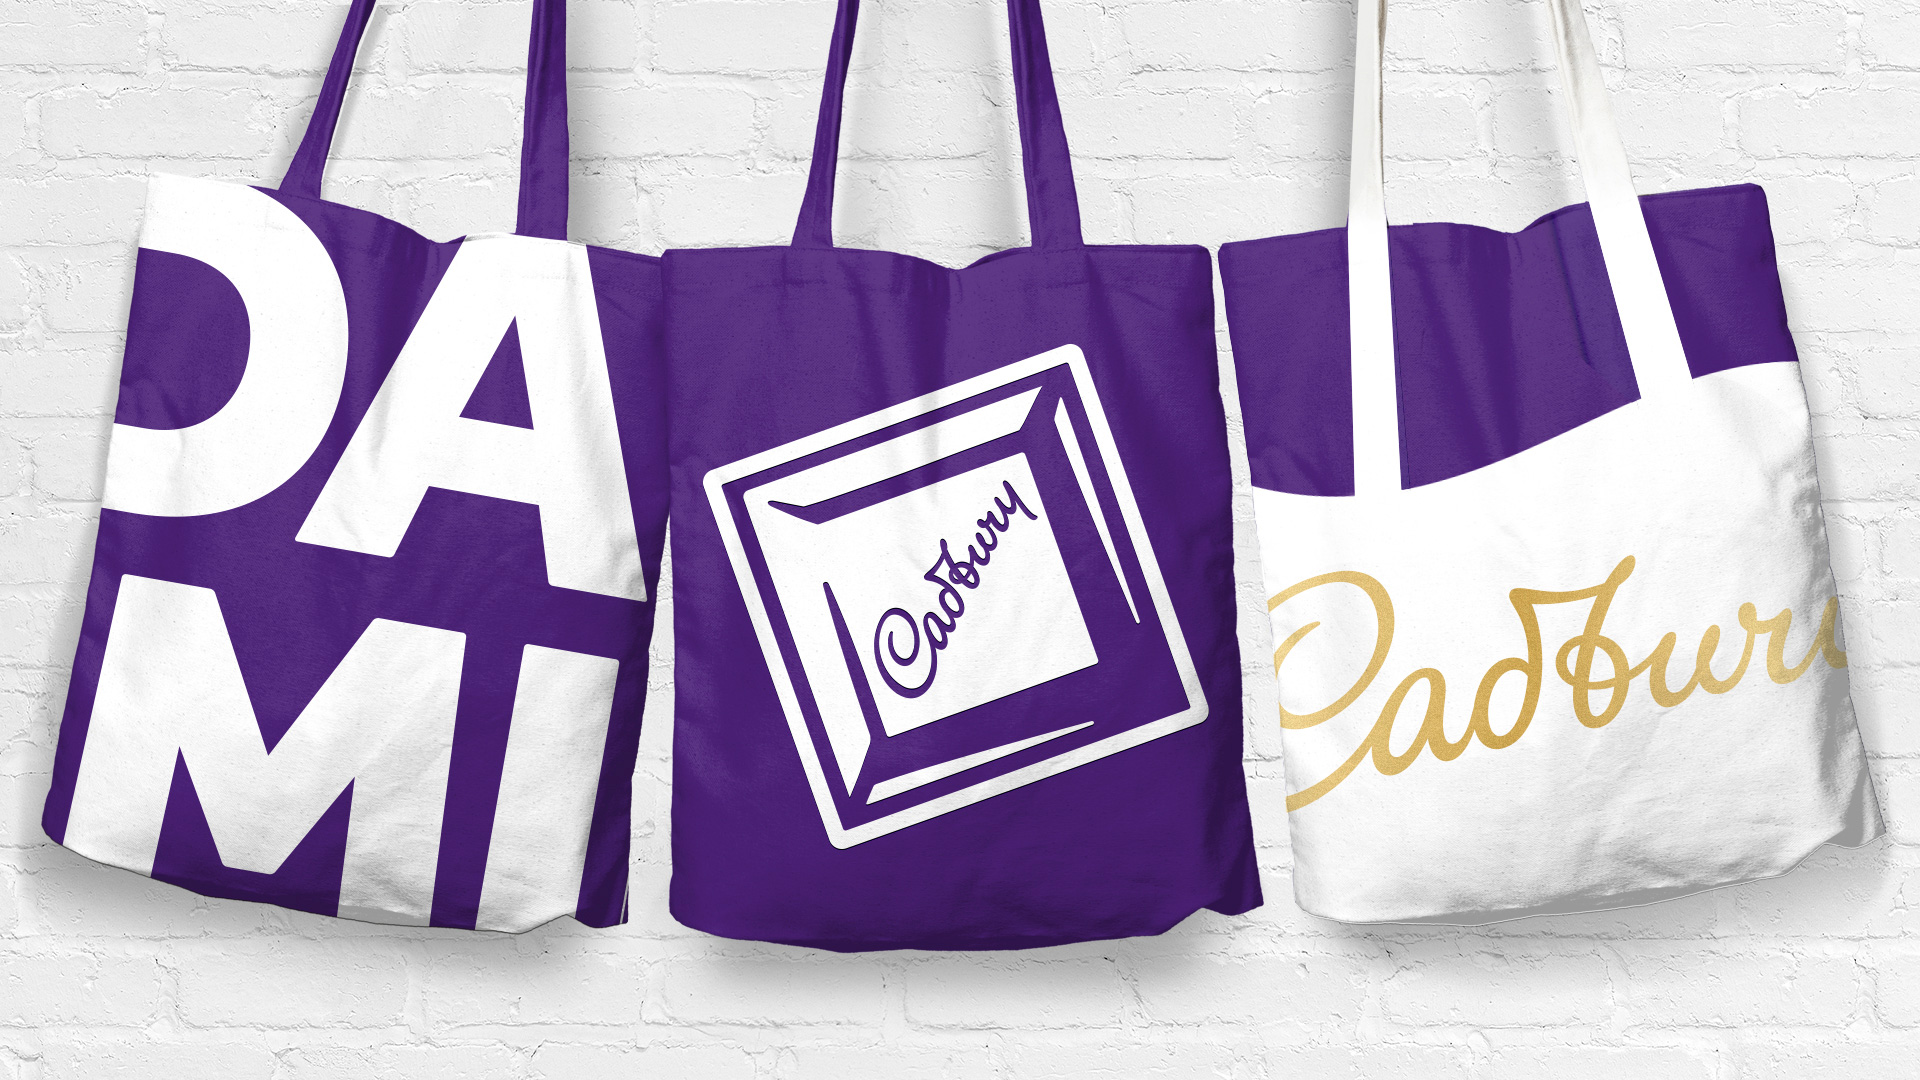 New Logo, Identity, and Packaging for Cadbury by Bulletproof